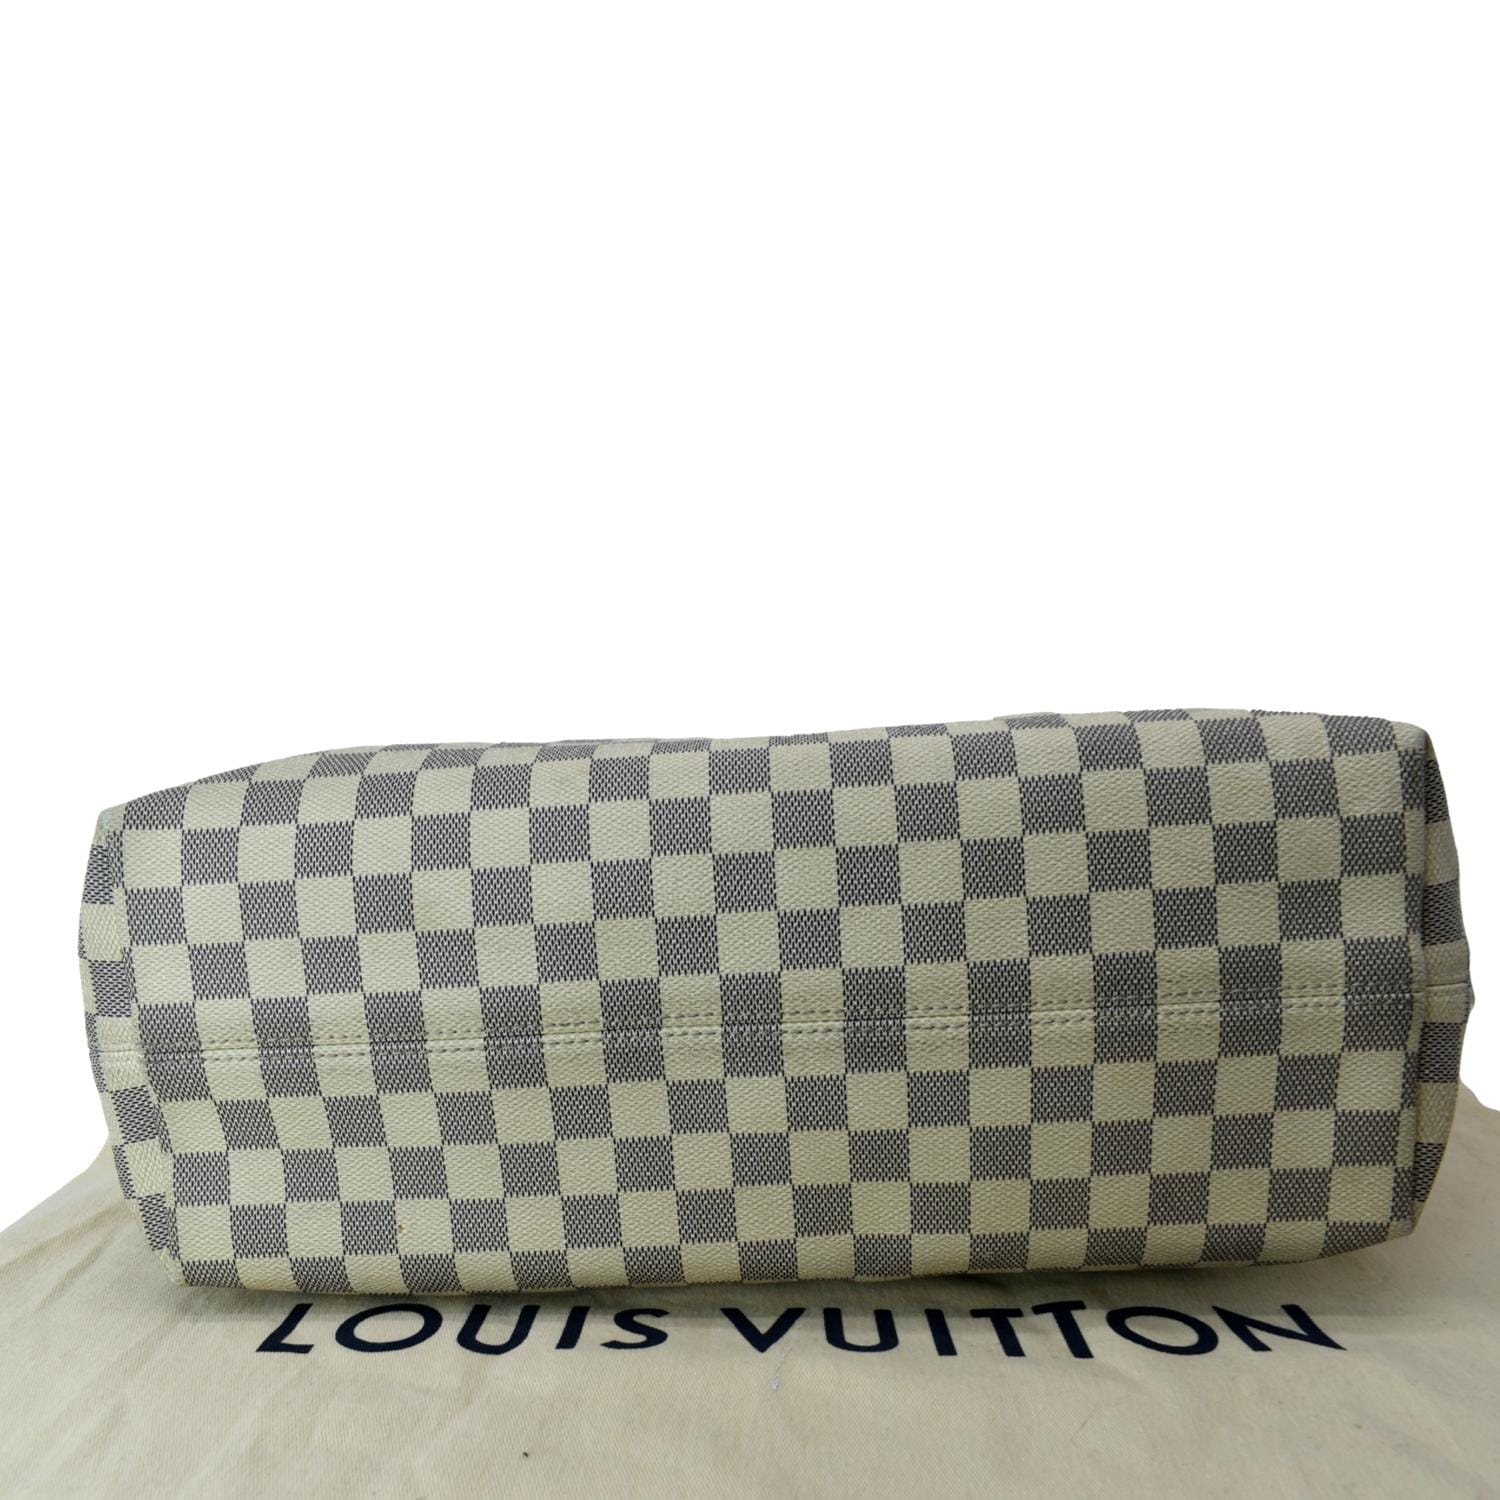 Authentic Louis Vuitton “duomo” in damier ebene! immaculate shape!